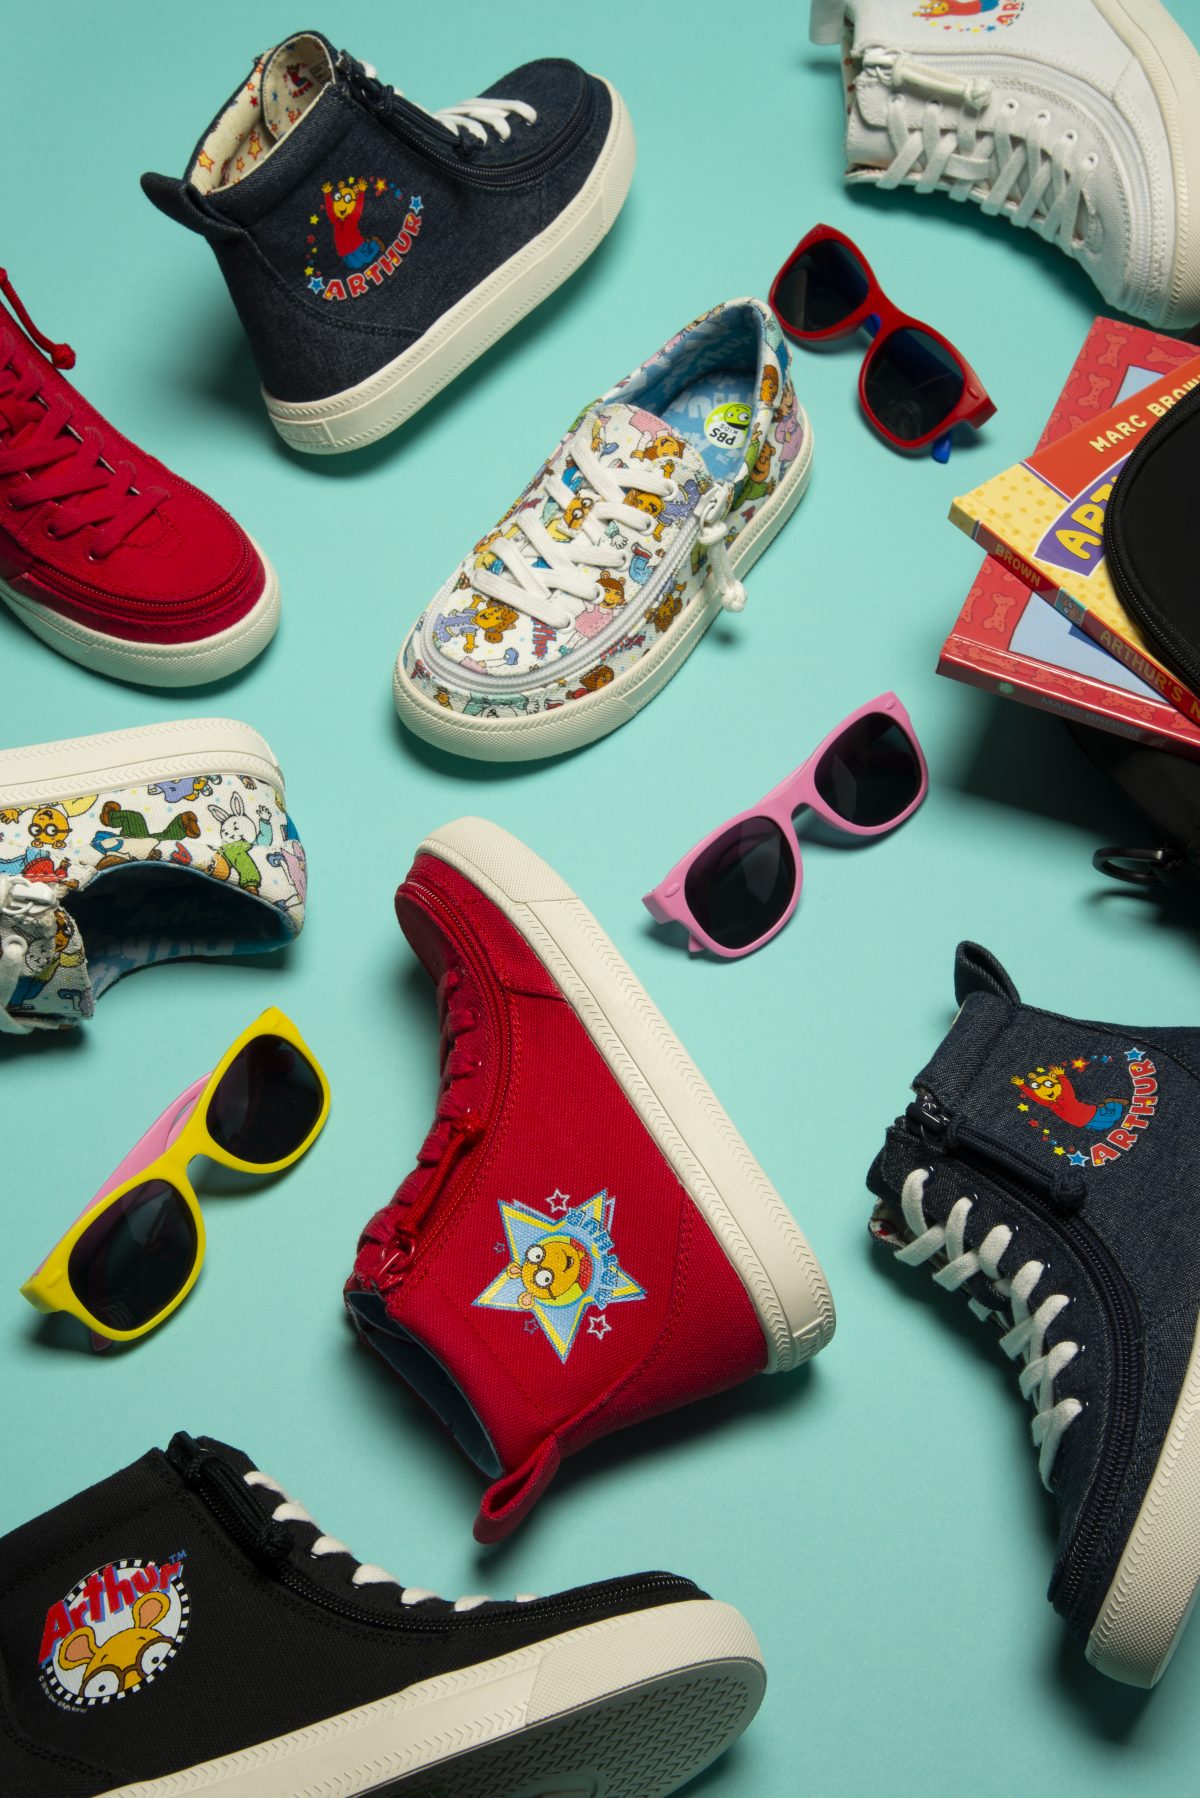 Zappos and PBS KIDS Team Up to Release Arthur Adaptive Collection